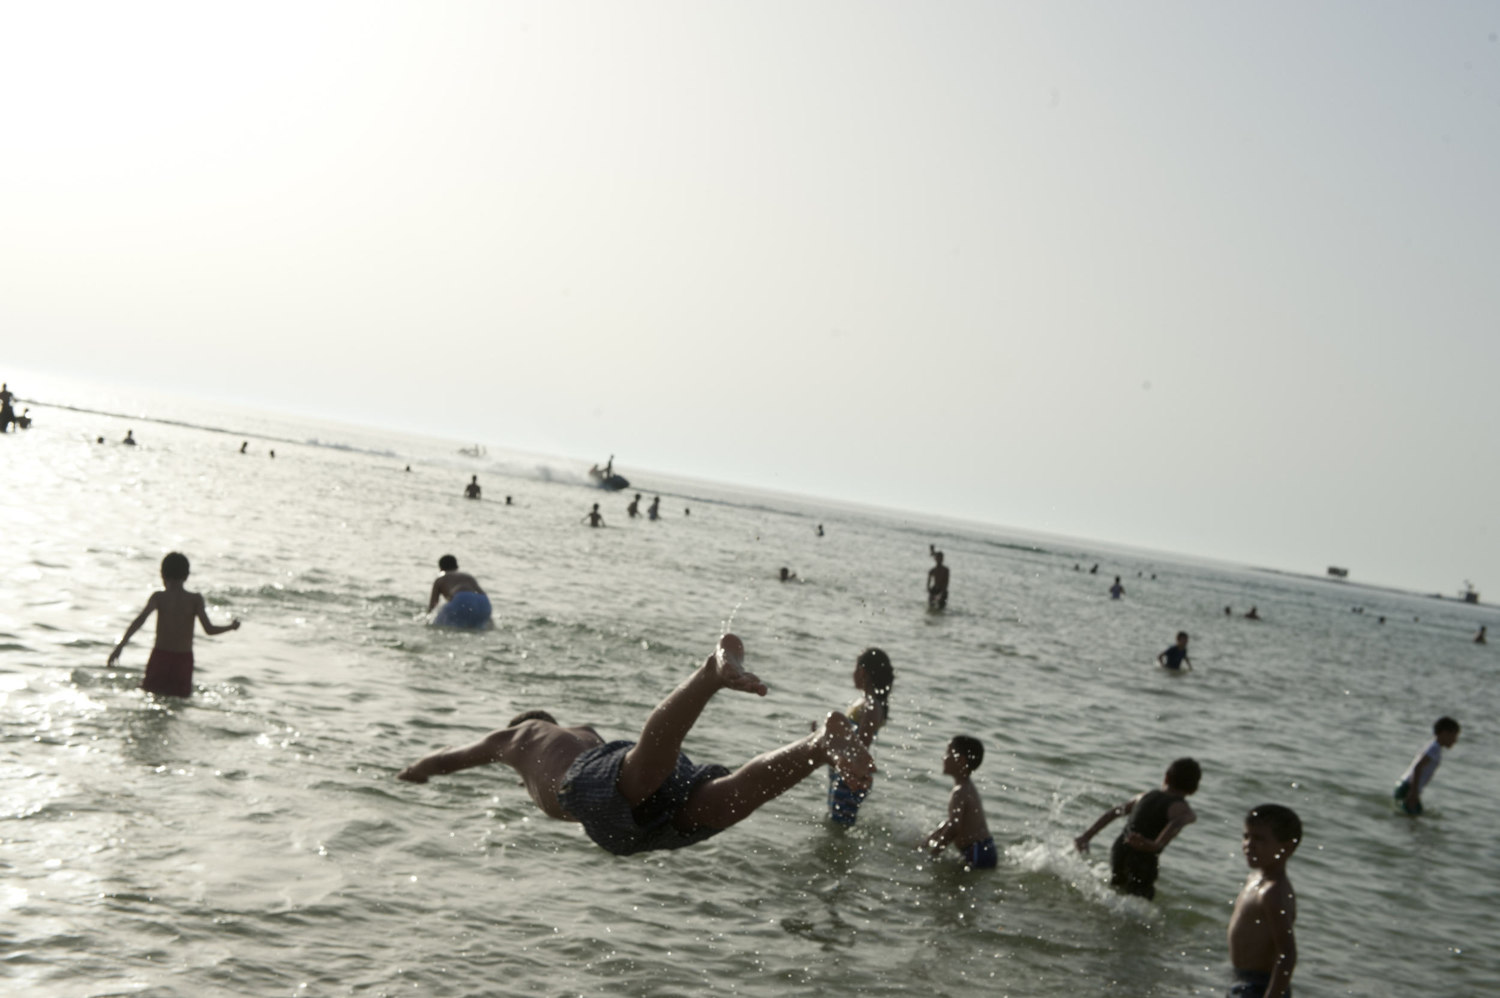  Boys escape the summer heat by diving into the ocean in downtown Tripoli on July 1st, 2012.

 